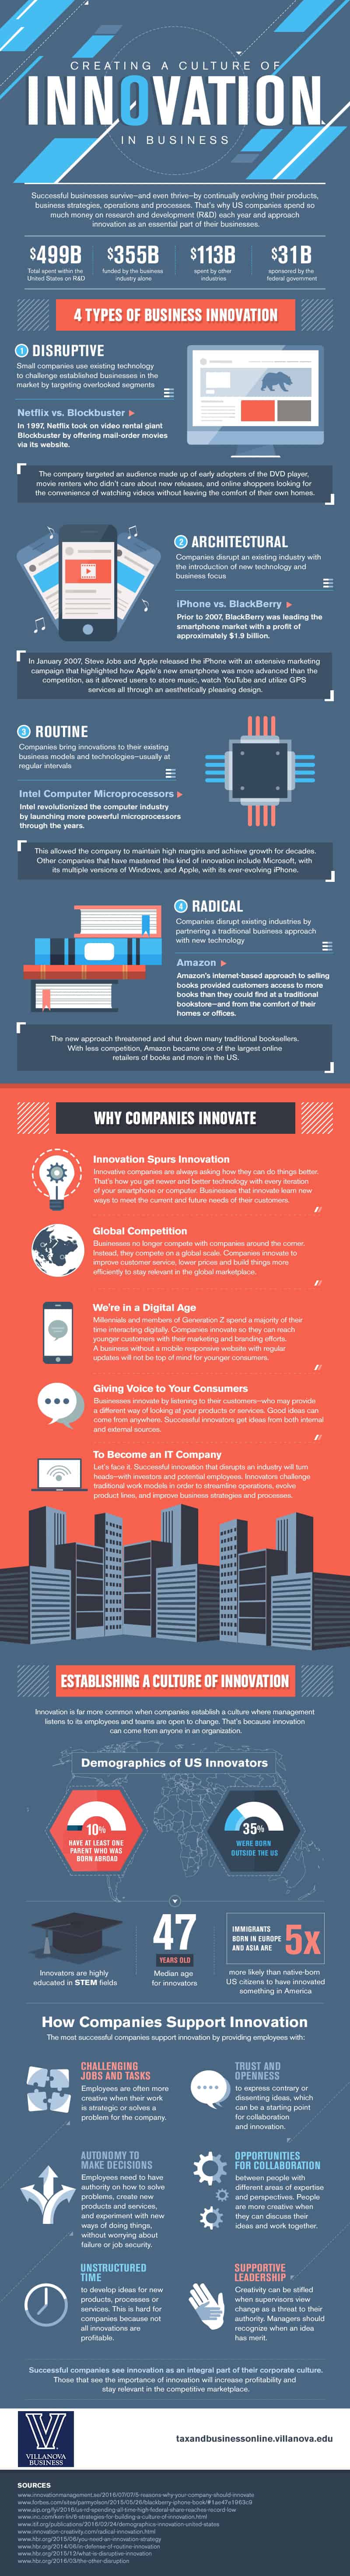 creating a culture of innovation infographic